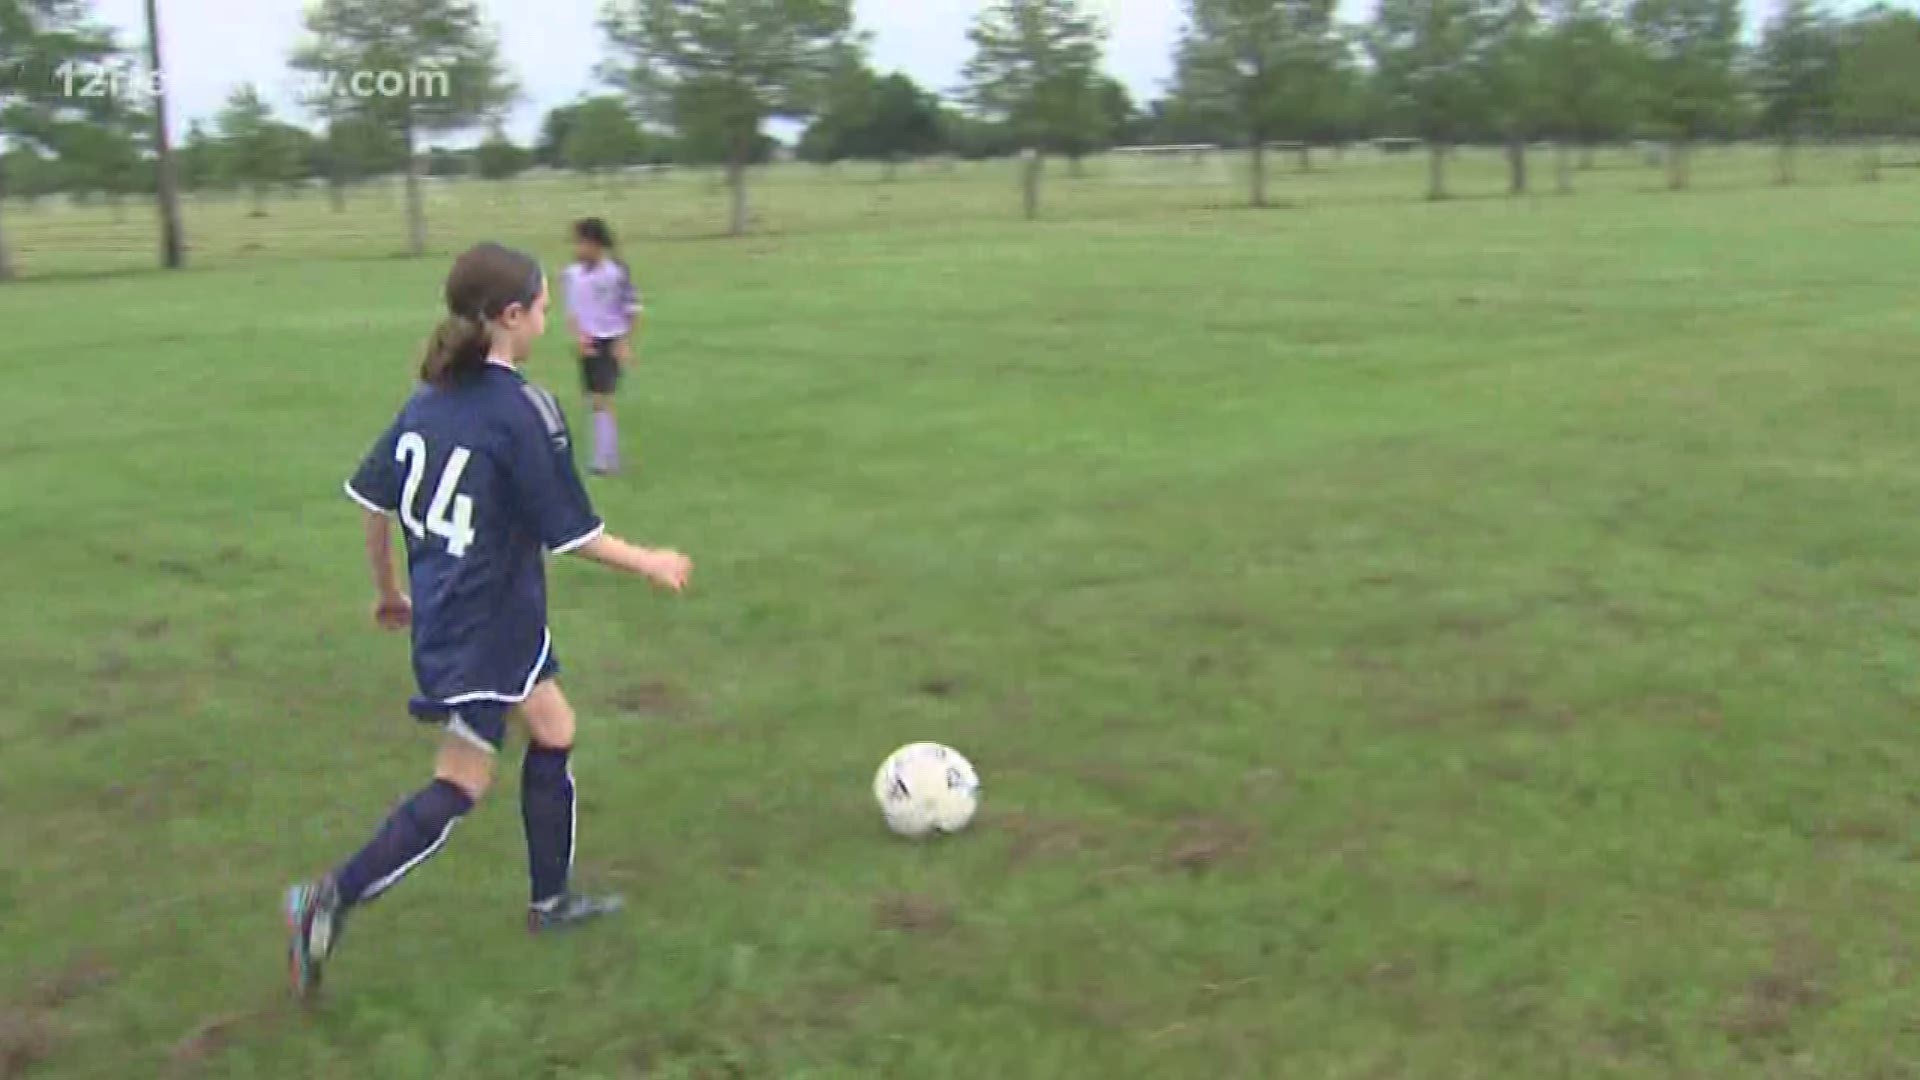 12News reporter Rachel Keller heads to the soccer field with the Beaumont Youth Soccer Club.